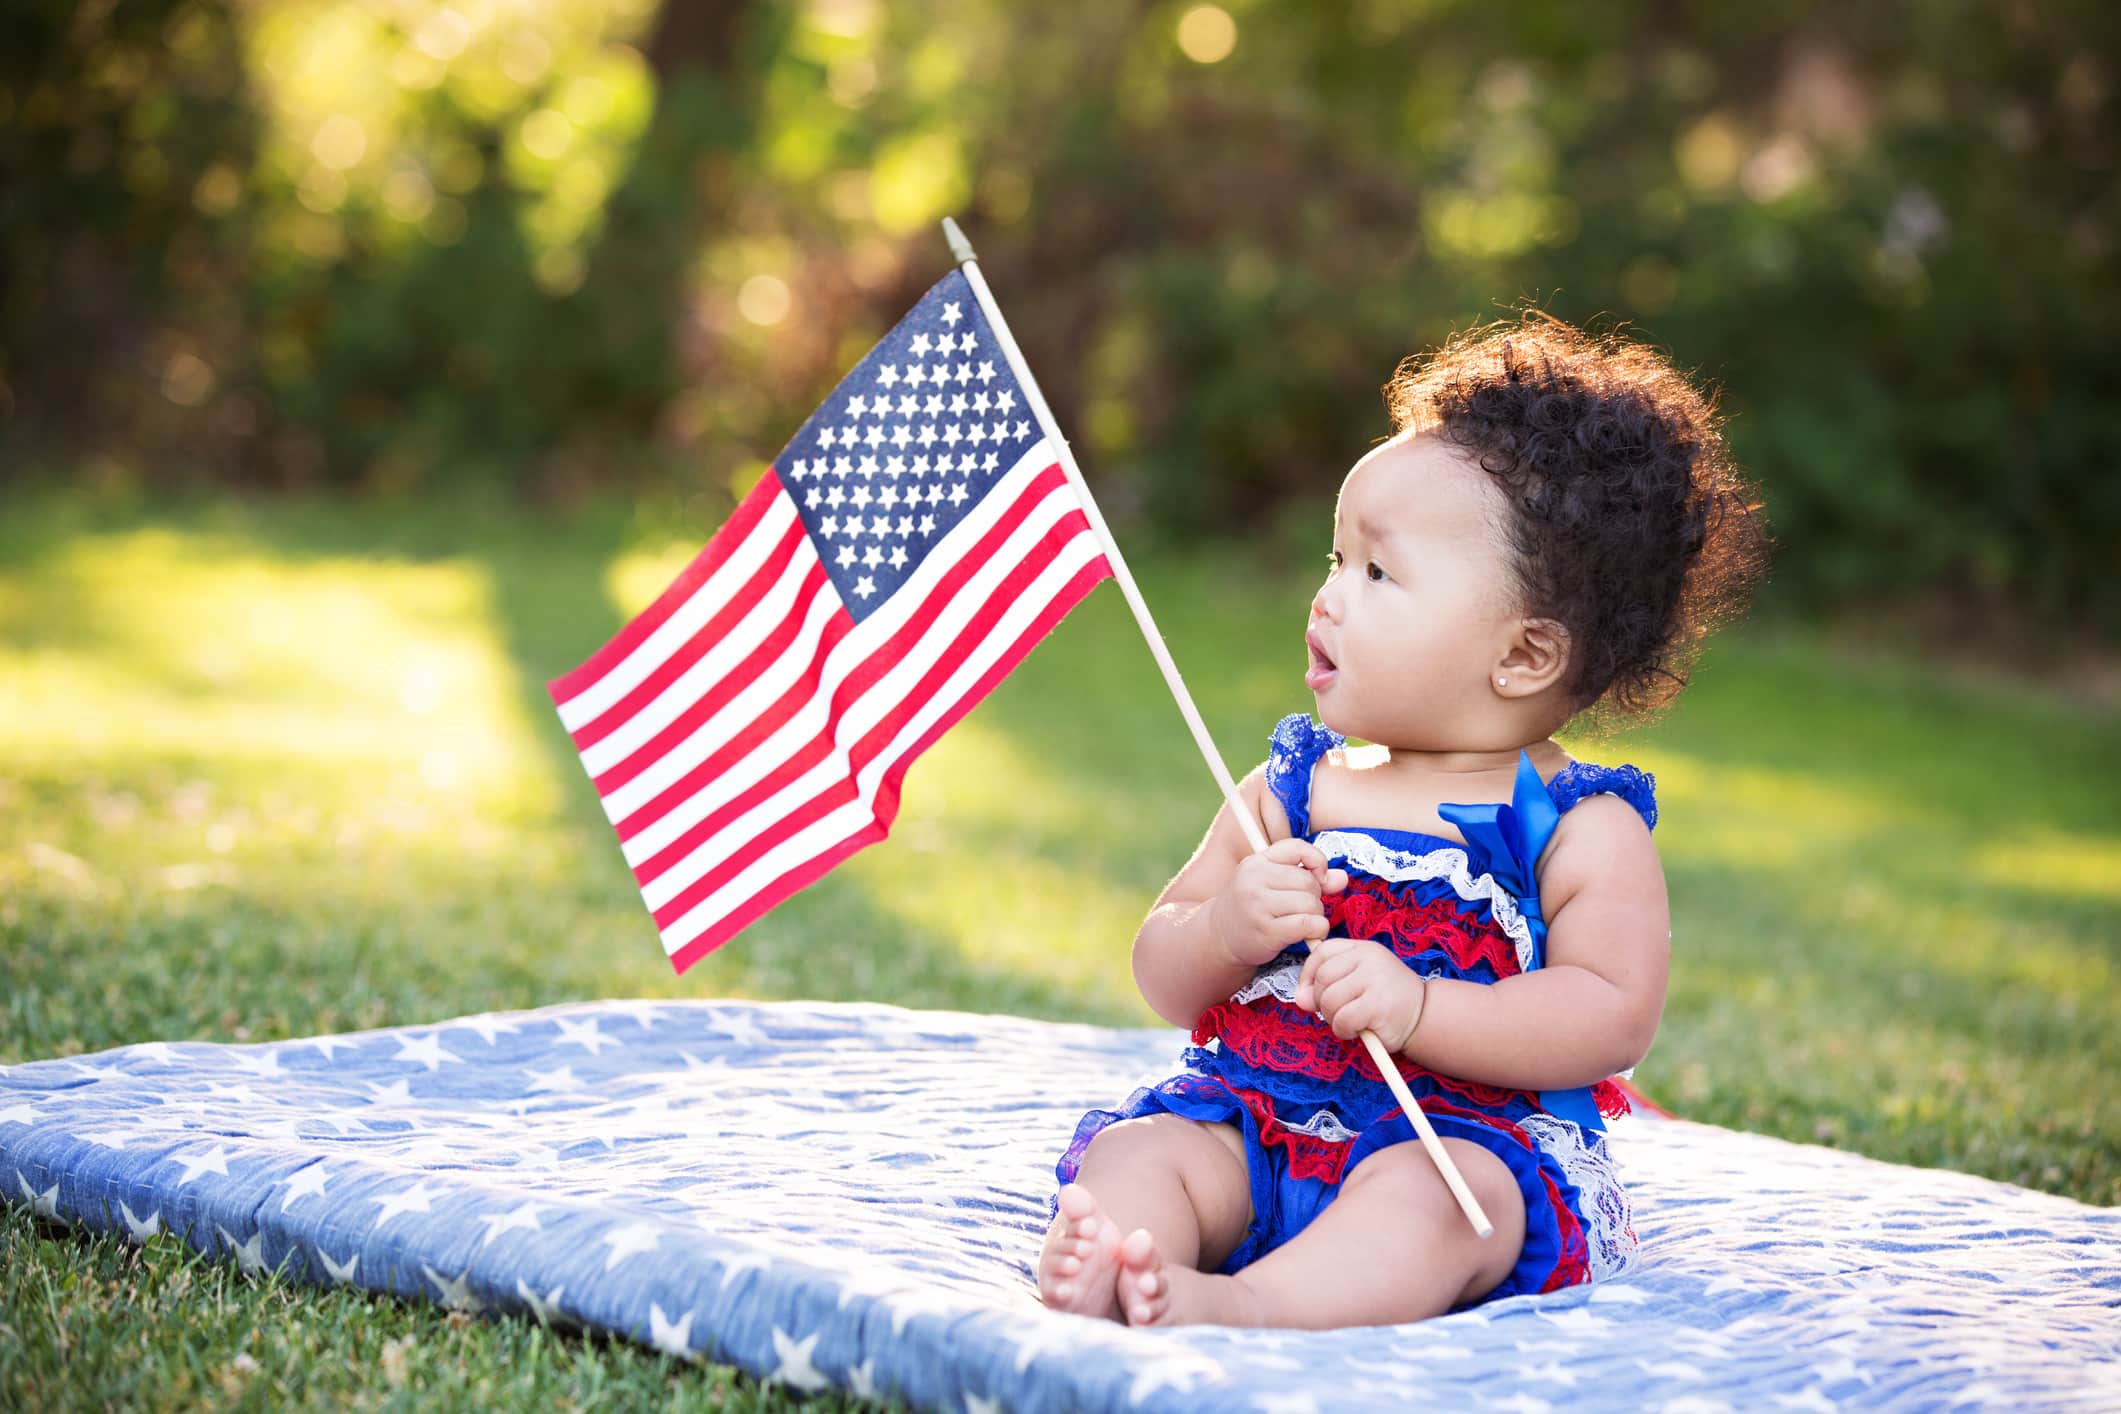 Beautiful six month old multi ethnic baby girl sitting on a blanket at the park and looking at the American flag she is holding.